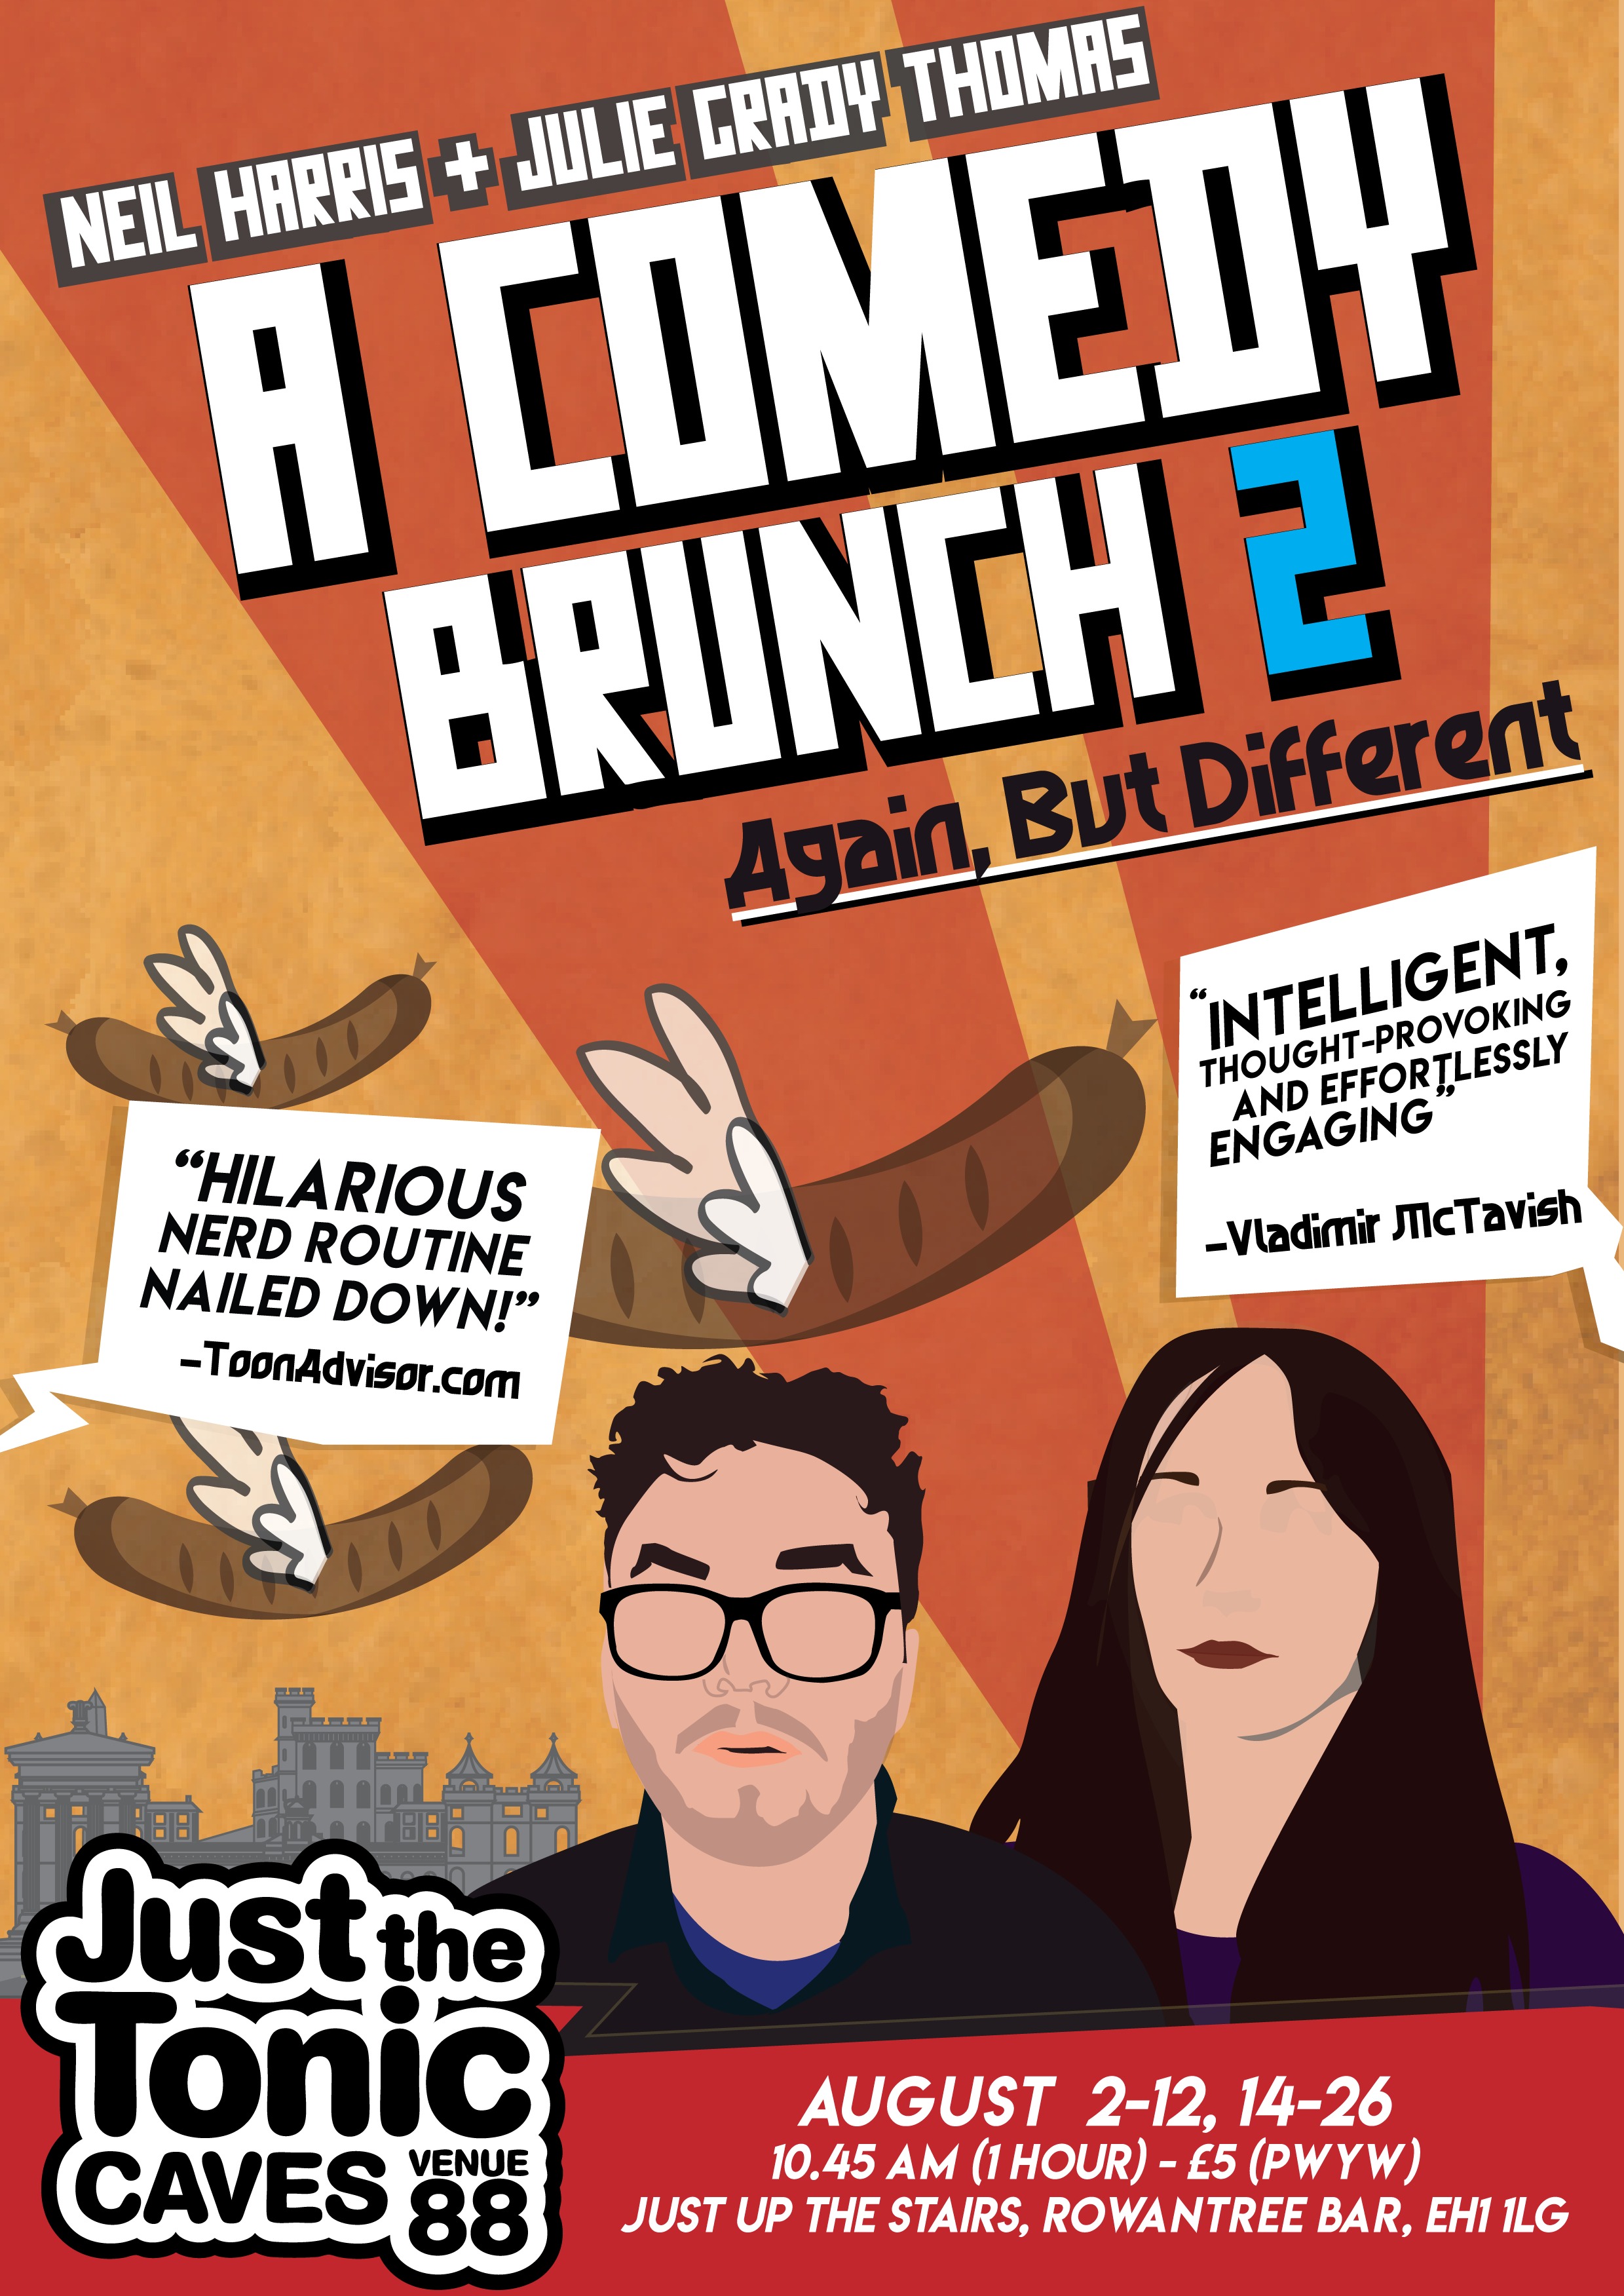 The poster for A Comedy Brunch 2